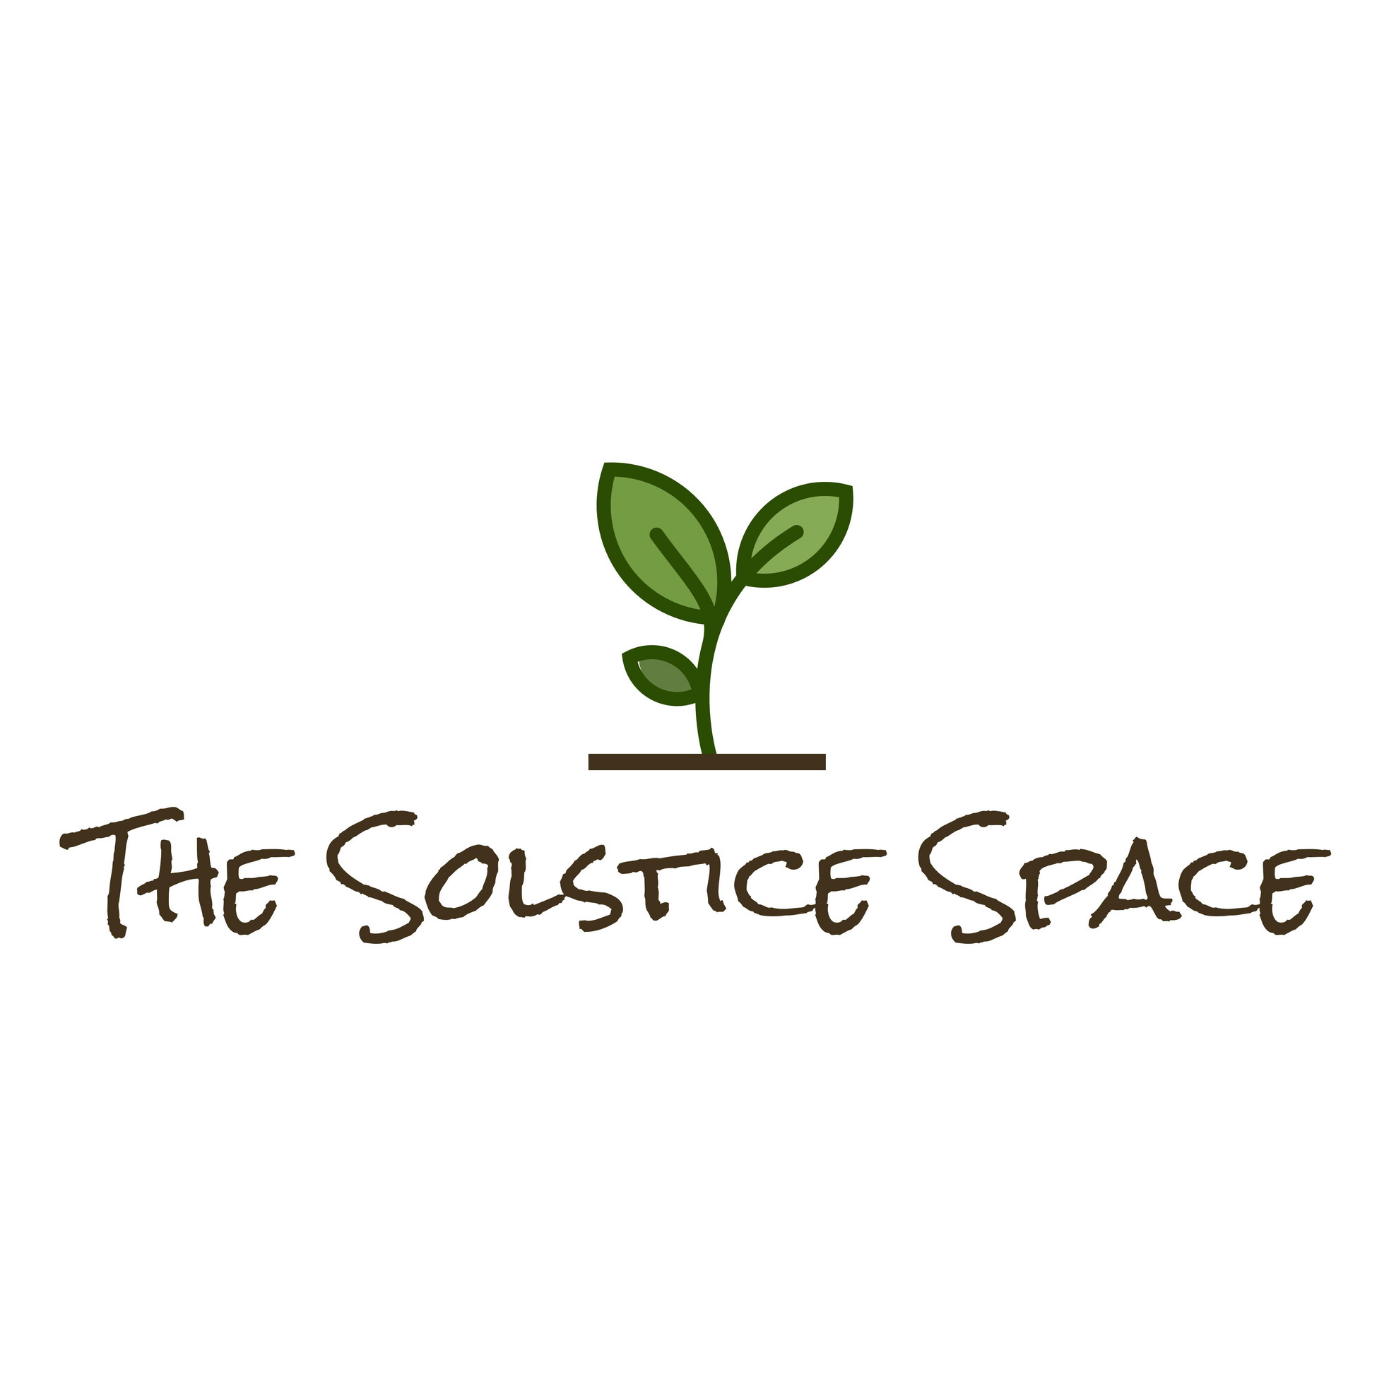 The Solstice Space